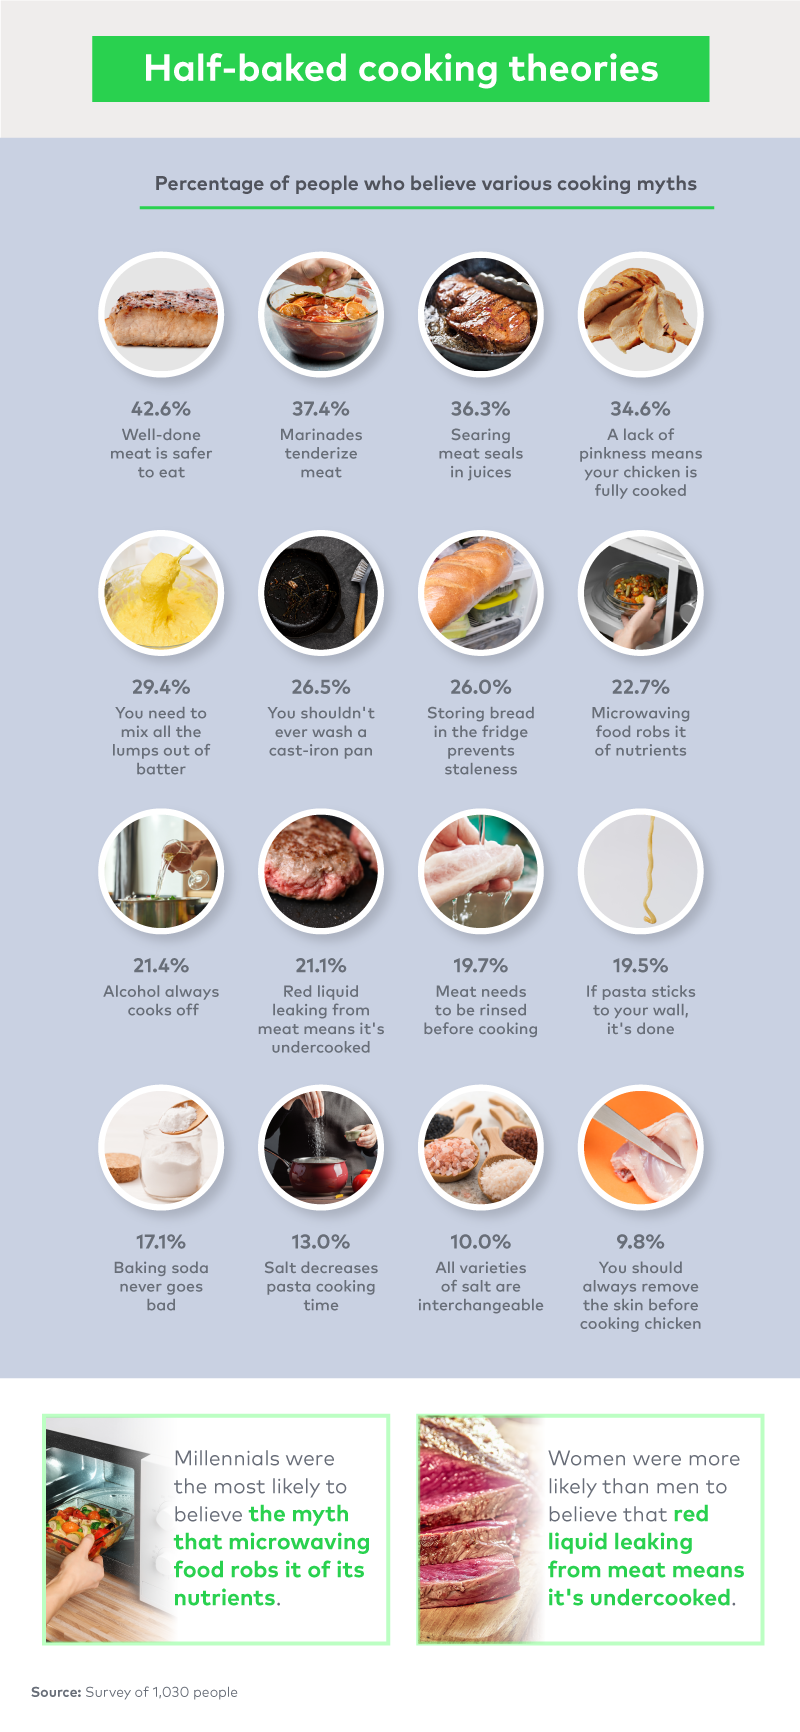 Percentage of people who believe various cooking myths